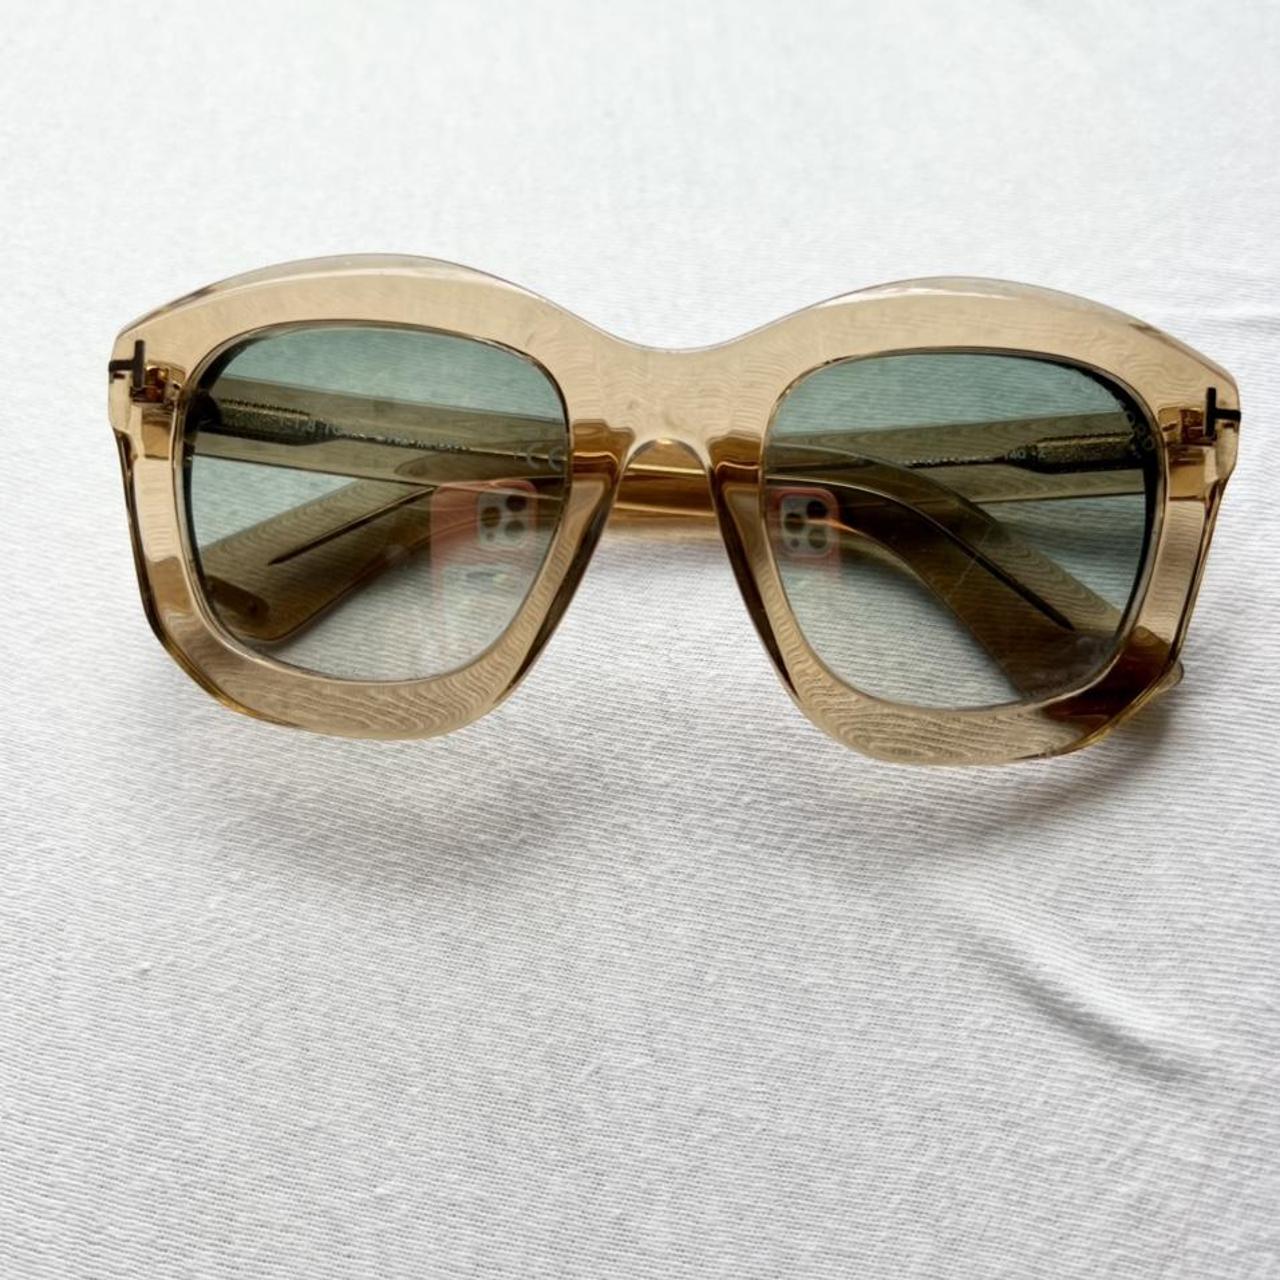 TOM FORD Women's Tan and Blue Sunglasses